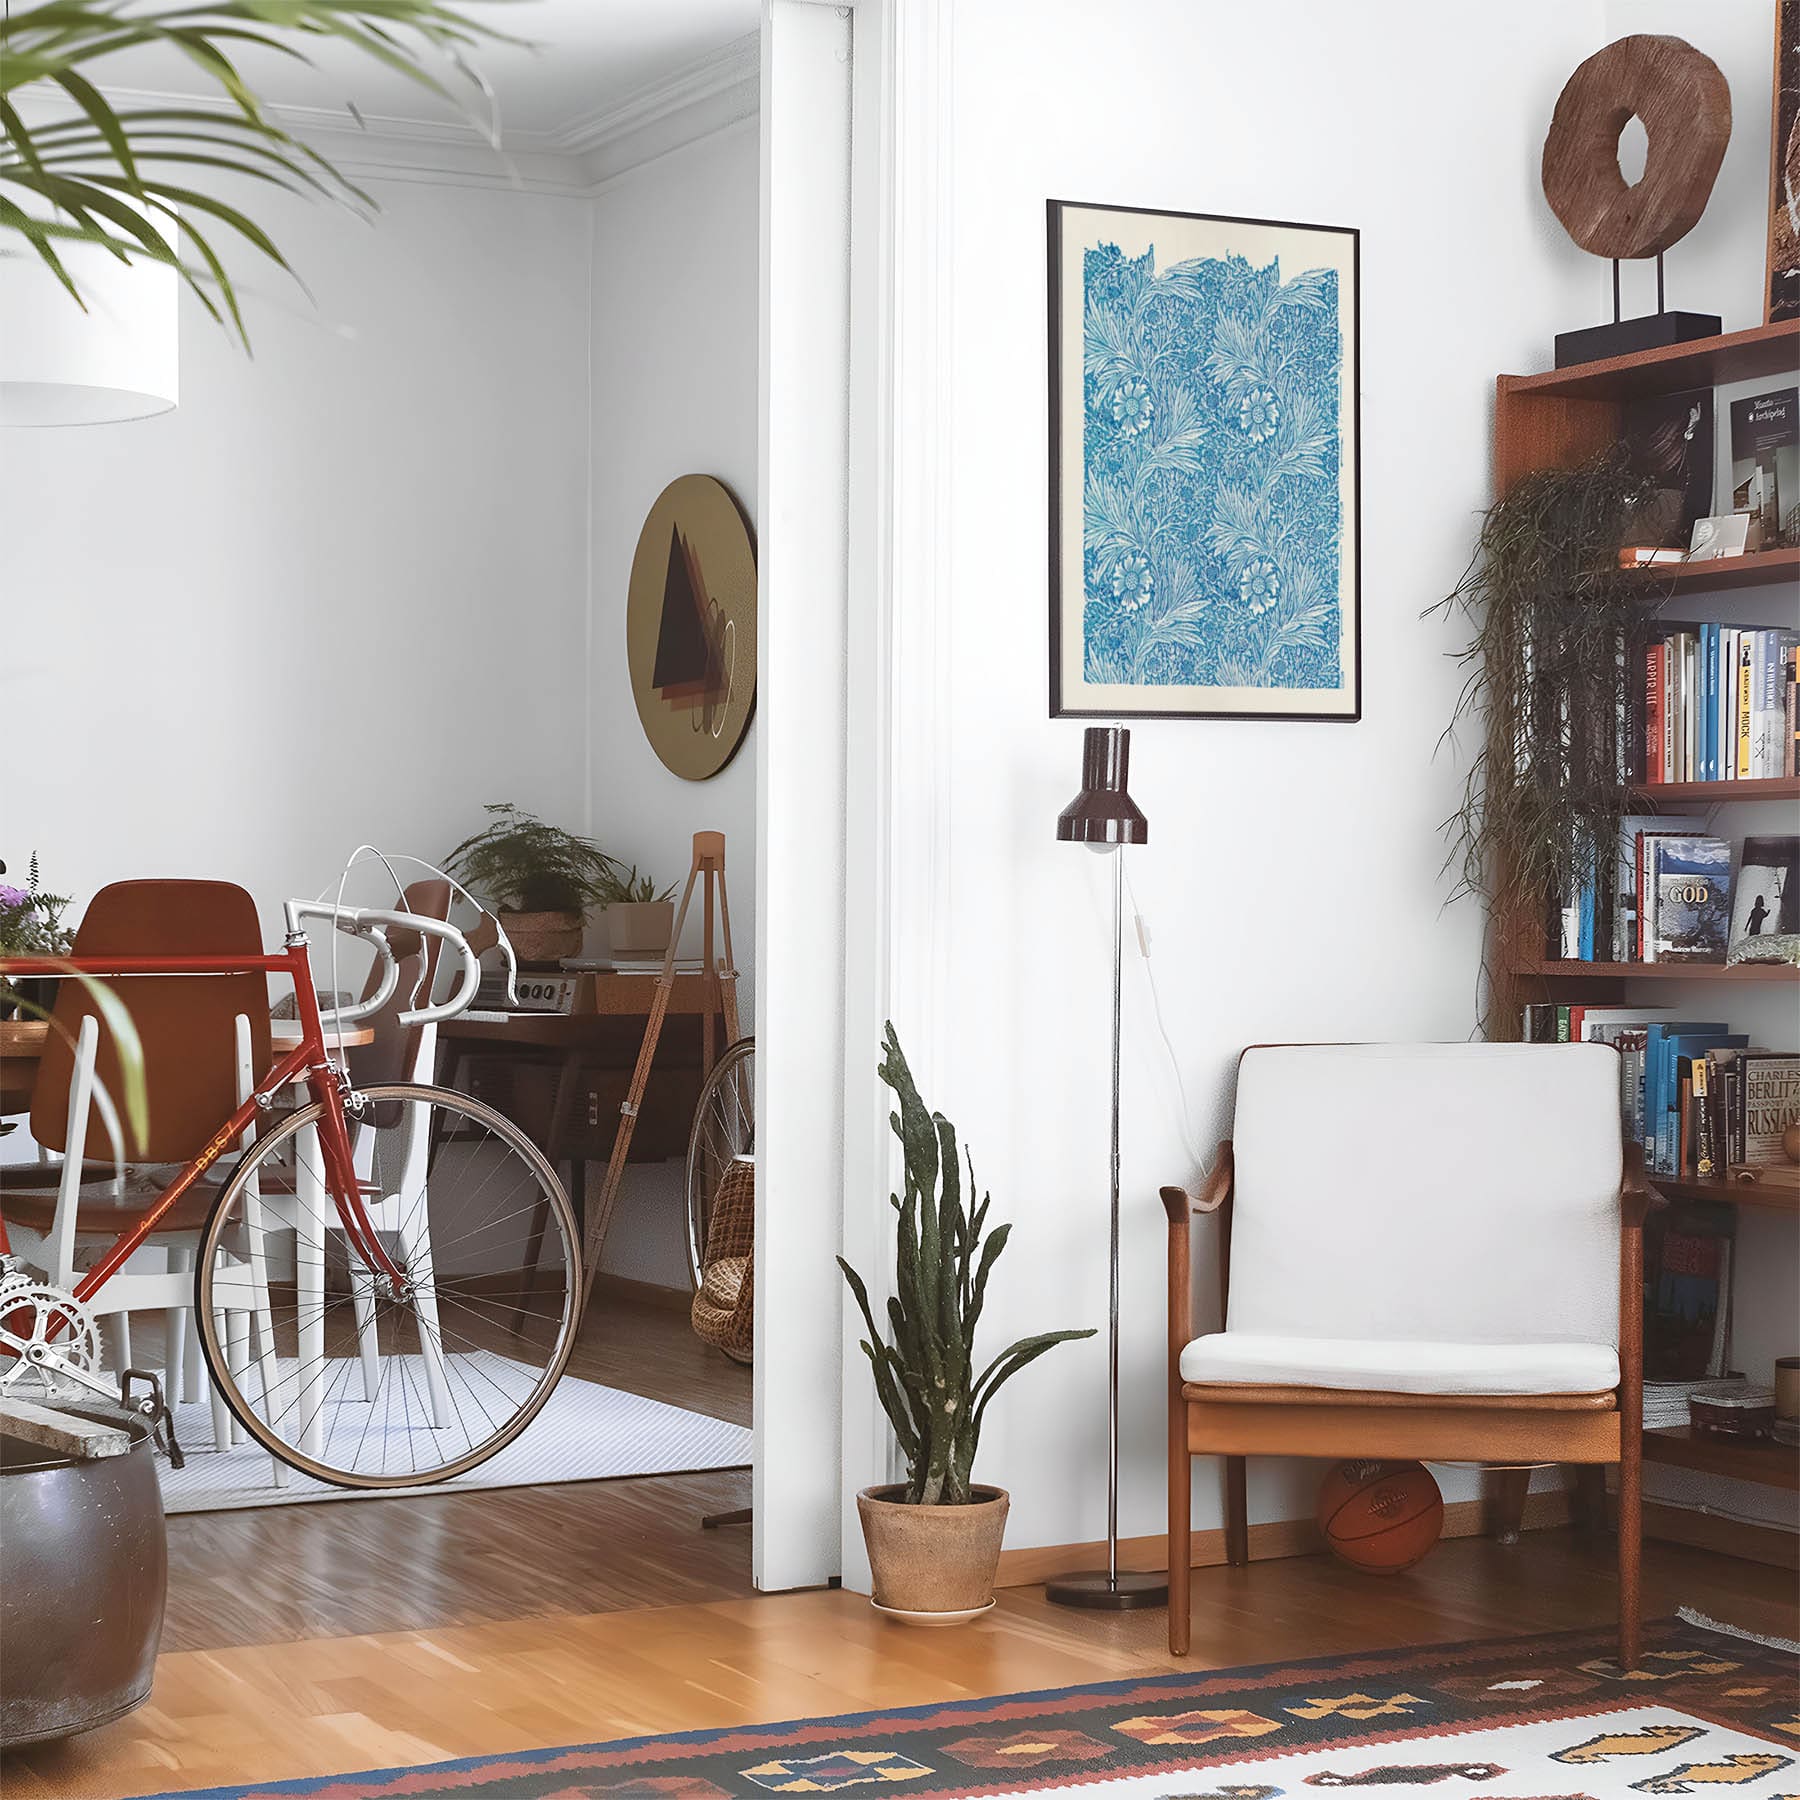 Eclectic living room with a road bike, bookshelf and house plants that features framed artwork of a Boho Flower above a chair and lamp